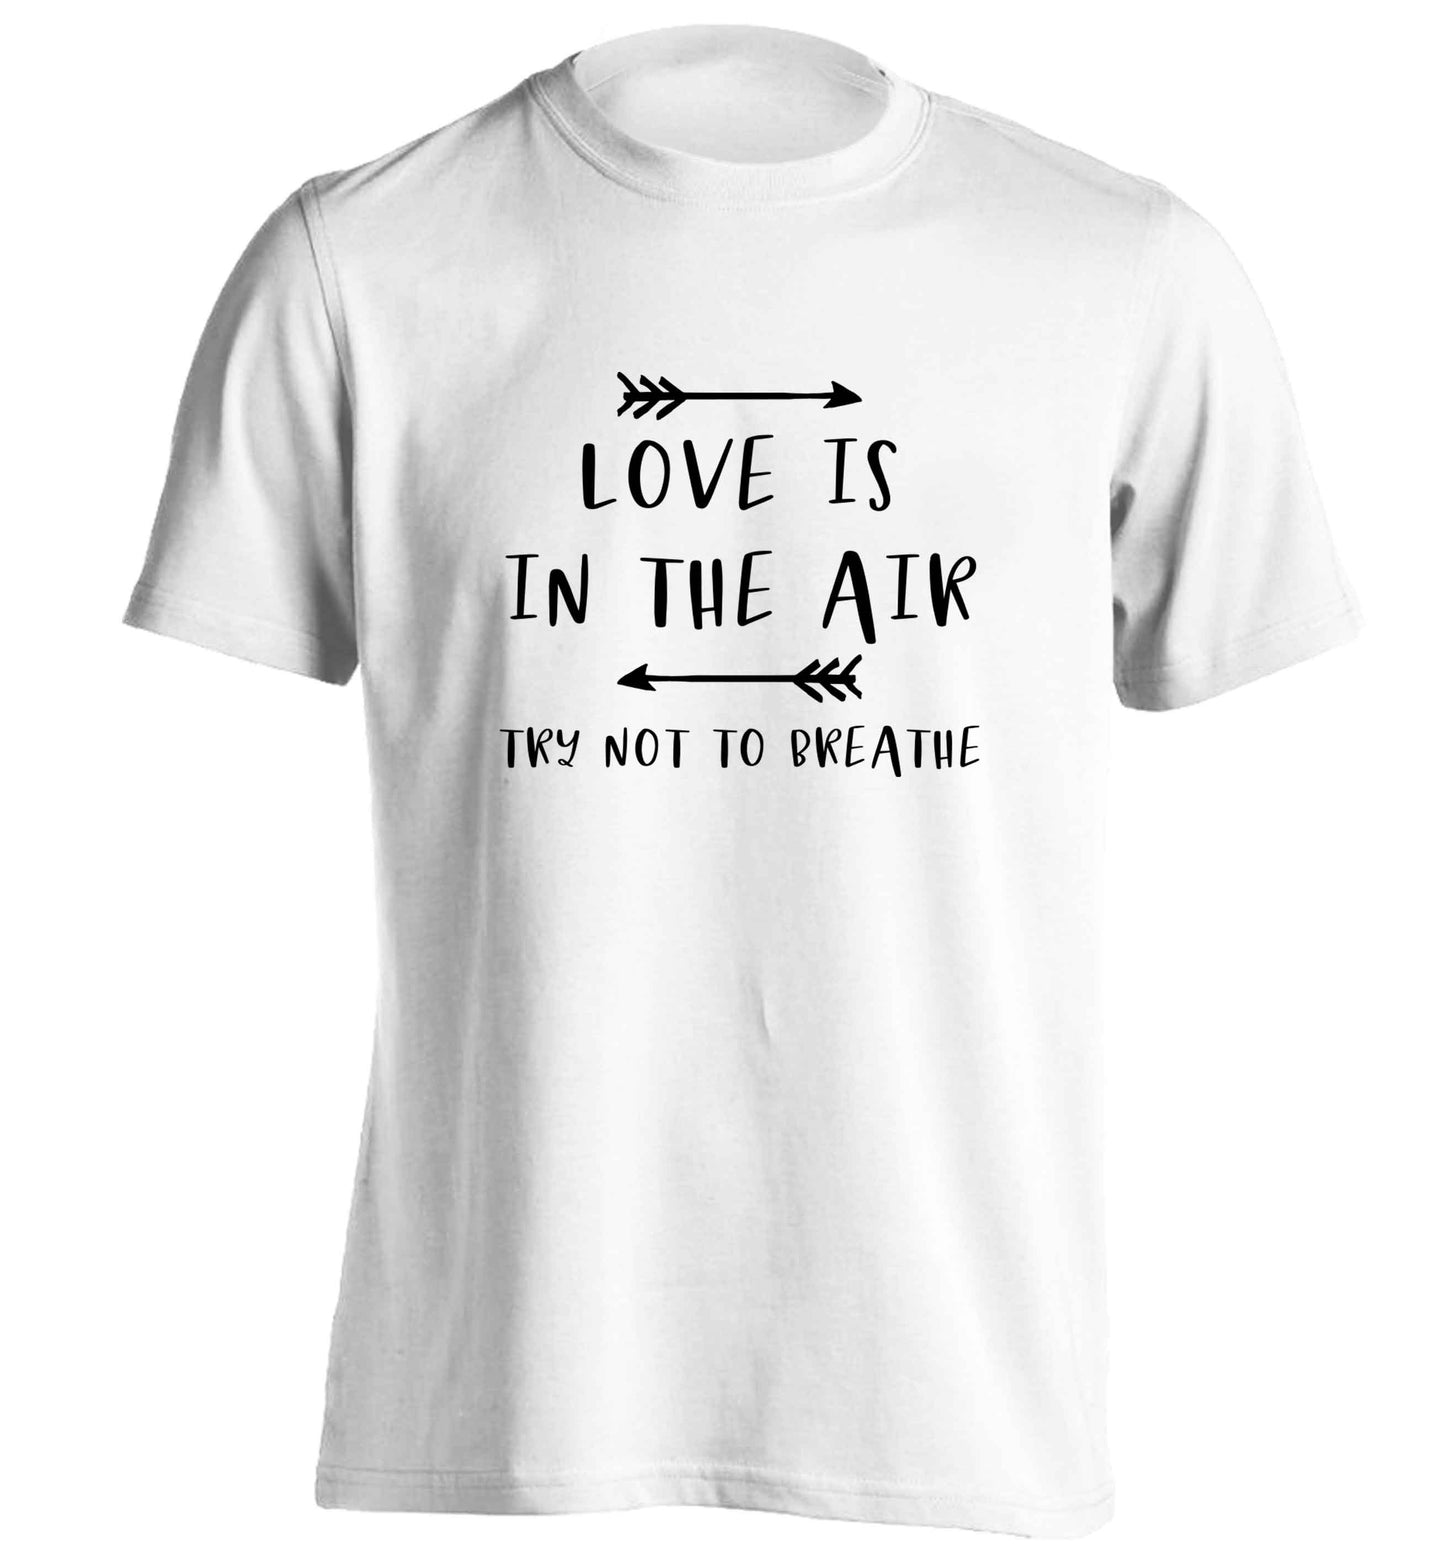 Love is in the air try not to breathe adults unisex white Tshirt 2XL